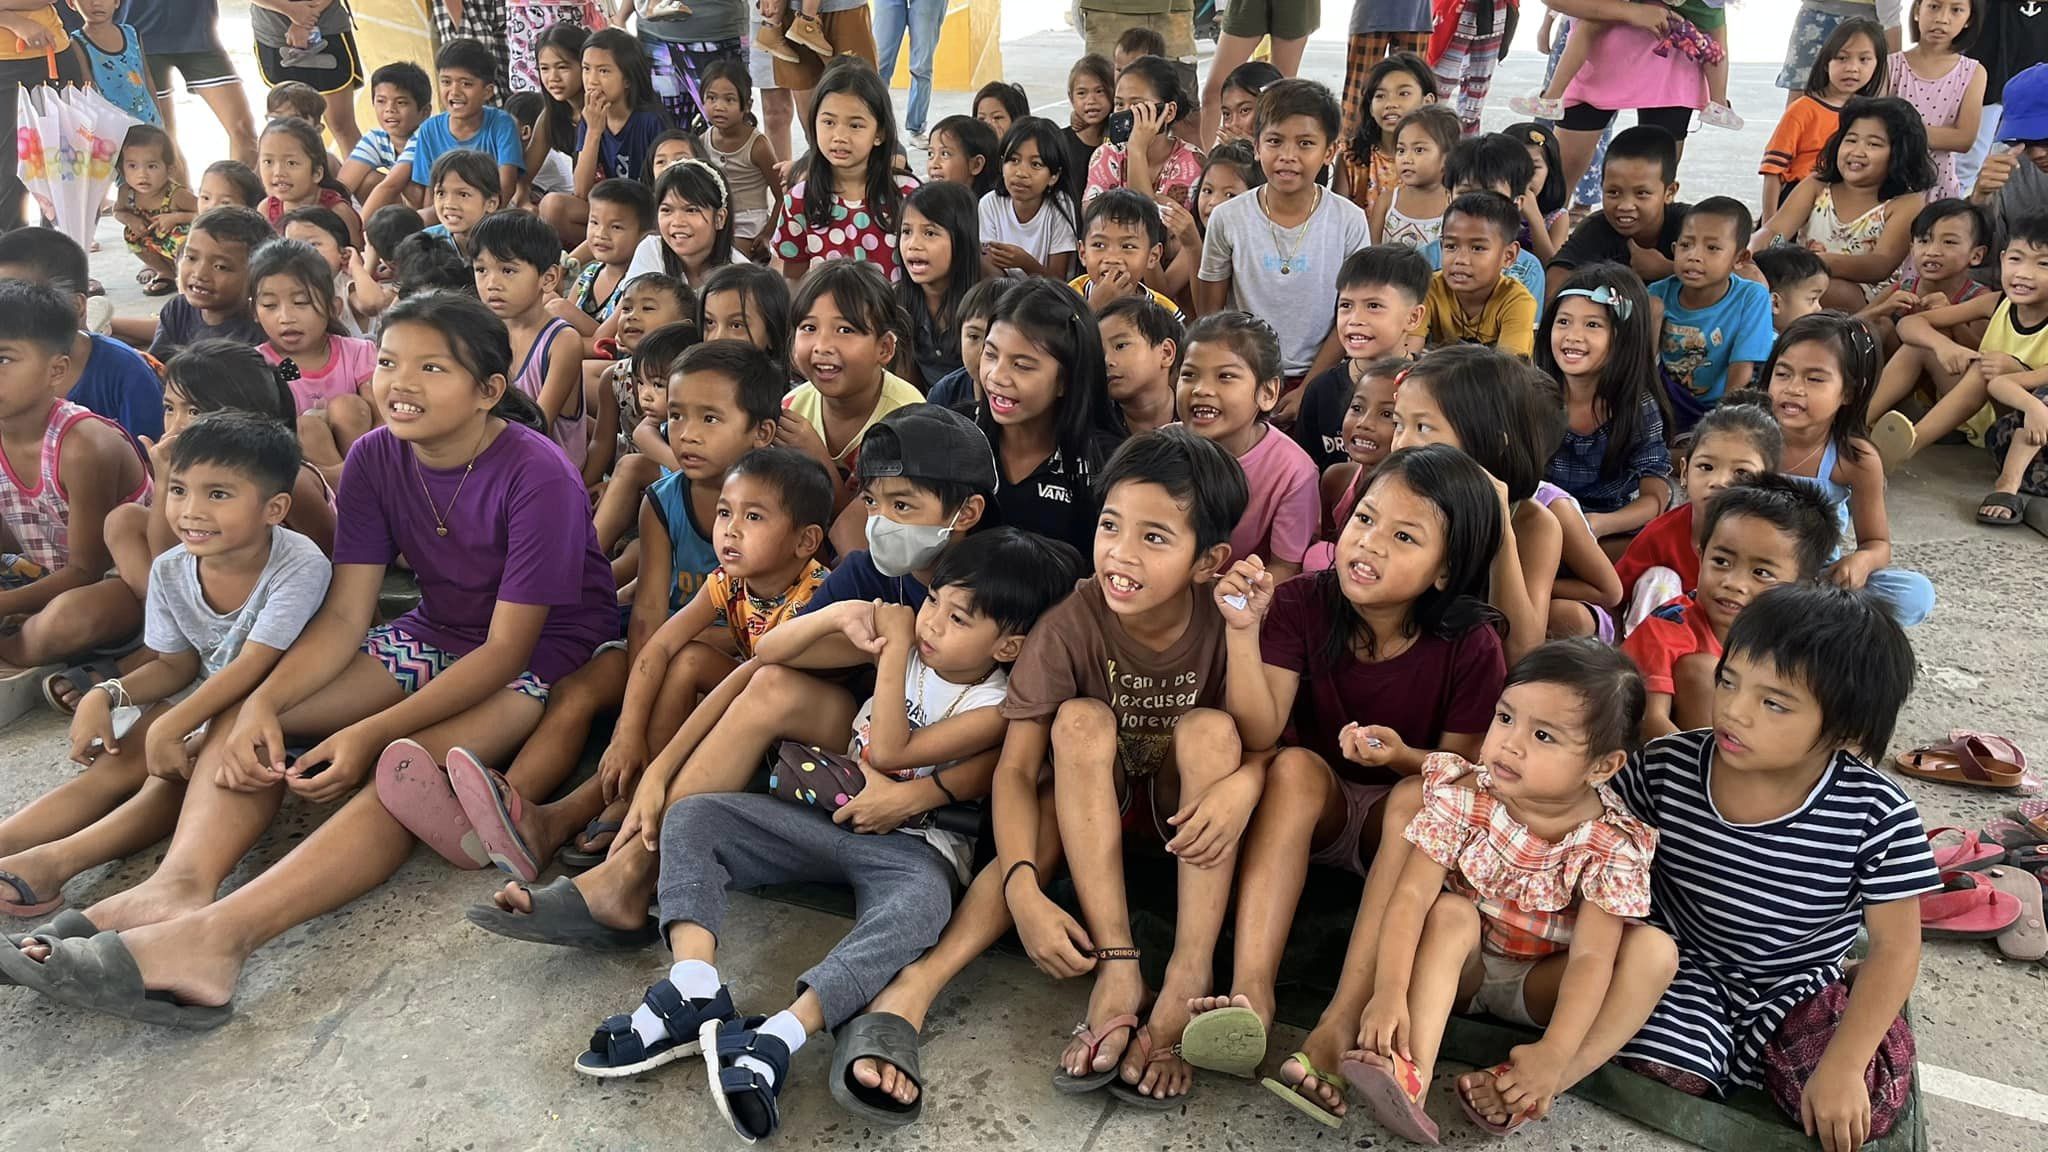 Children in the Philippines learn about how to avoid online exploitation.